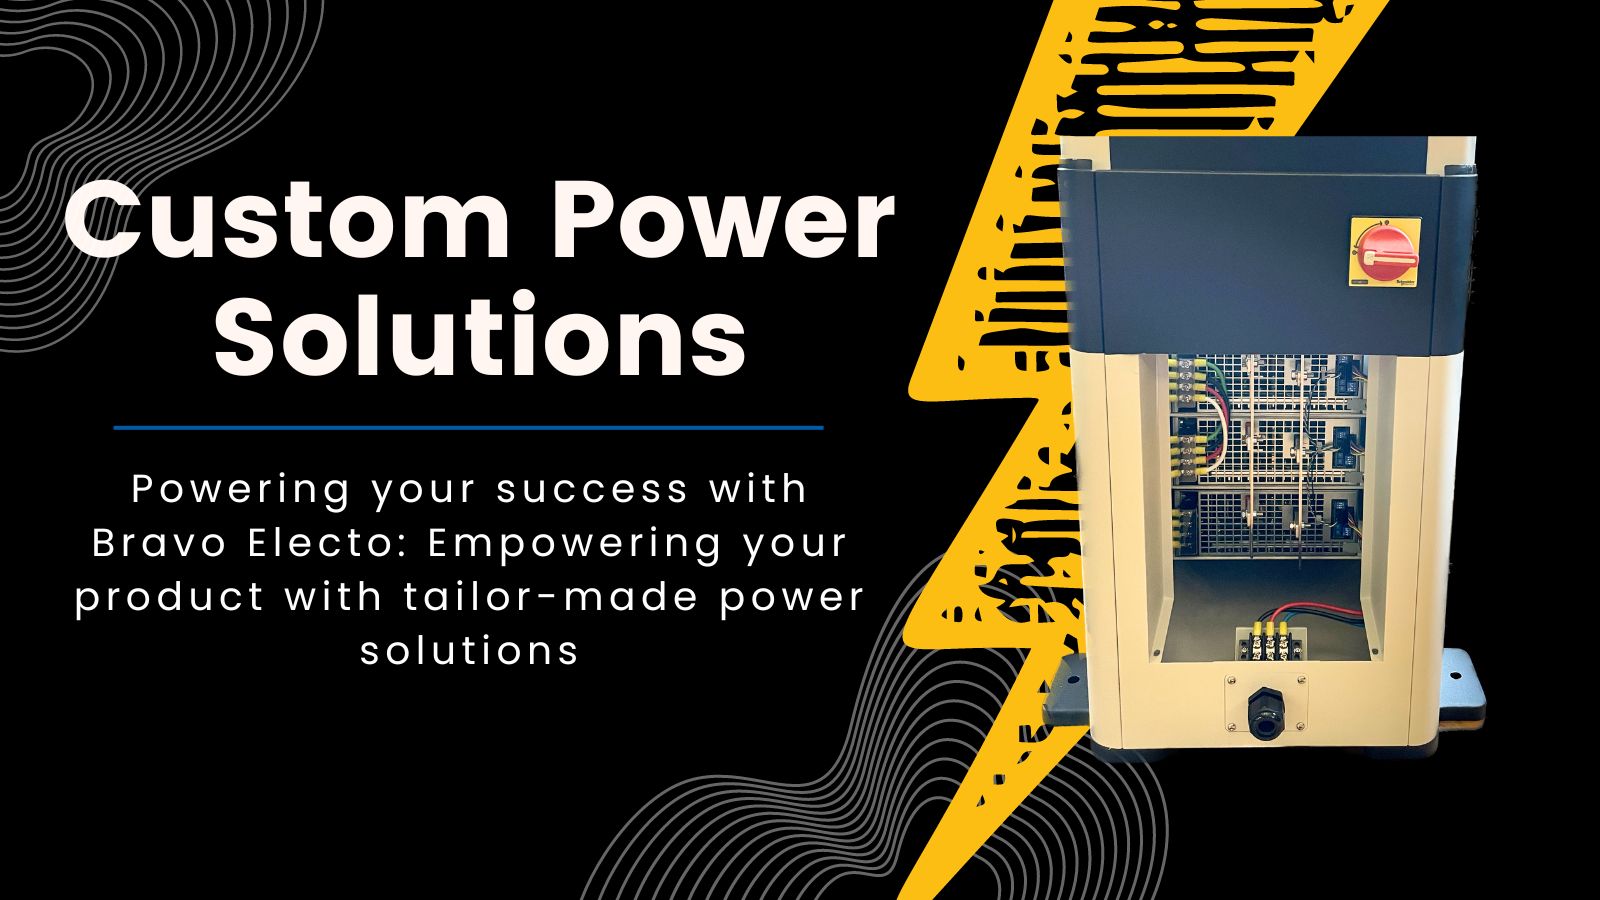 Title: Custom Power Solutions in bold white lettering underneath talks about Bravo Electro's customer power solutions. Next to it is a bright yellow lightning bolt with a custom power supply picture on top of it.